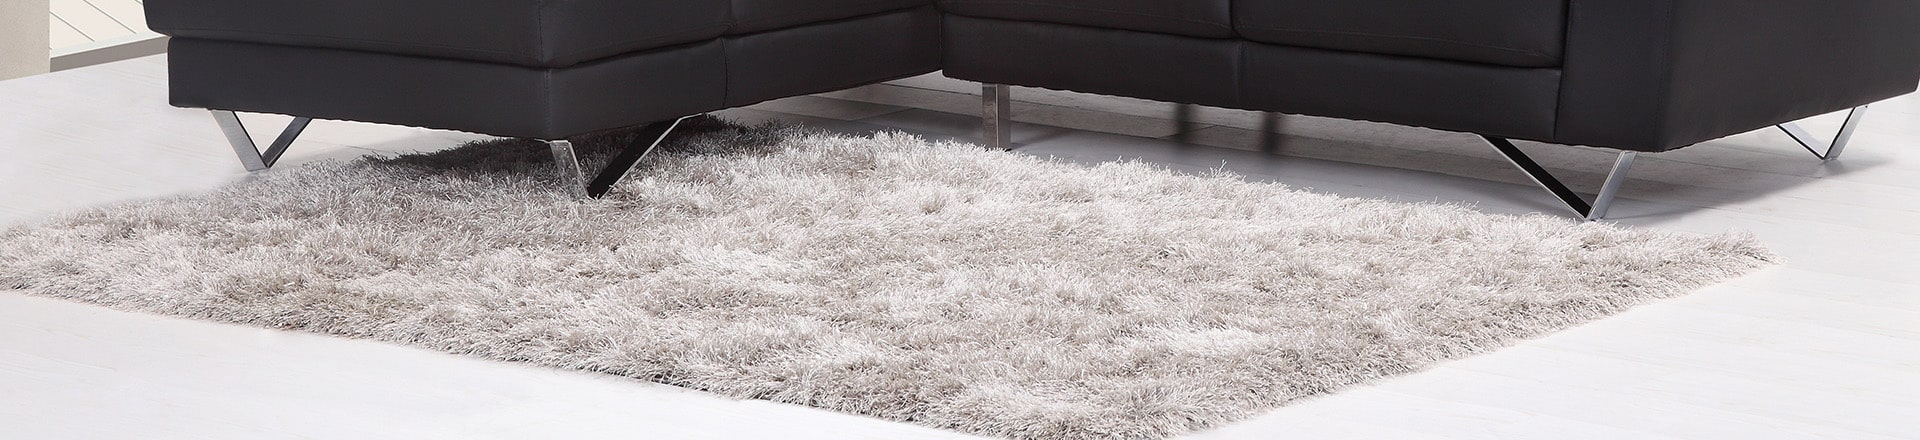 11How to Make Carpets Look New Again